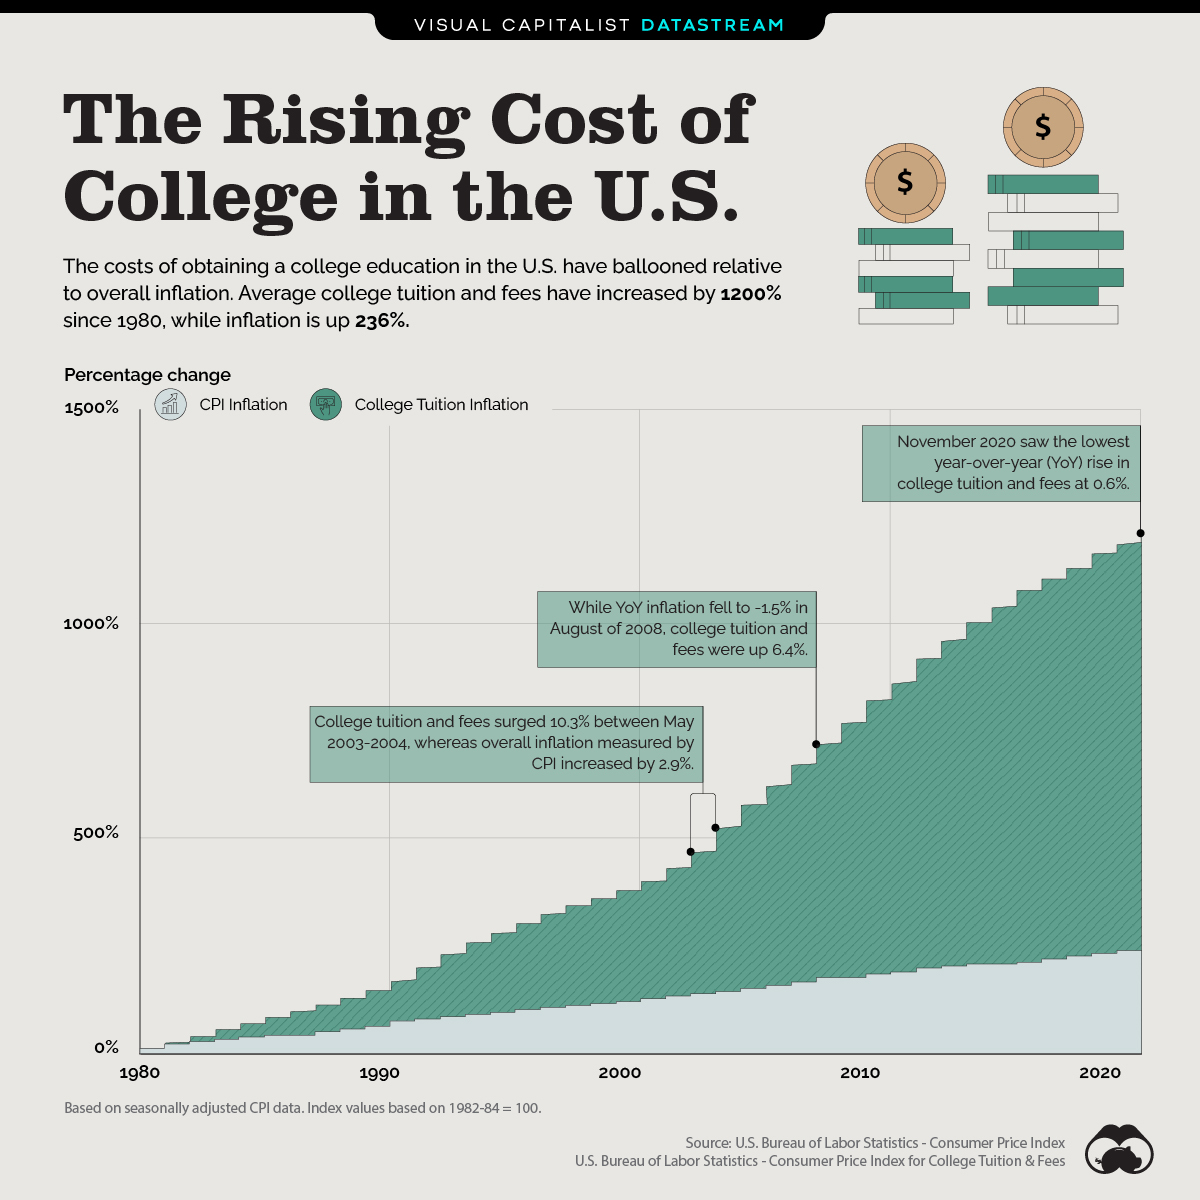 Why is European tuition so low compared to the US? r/neoliberal